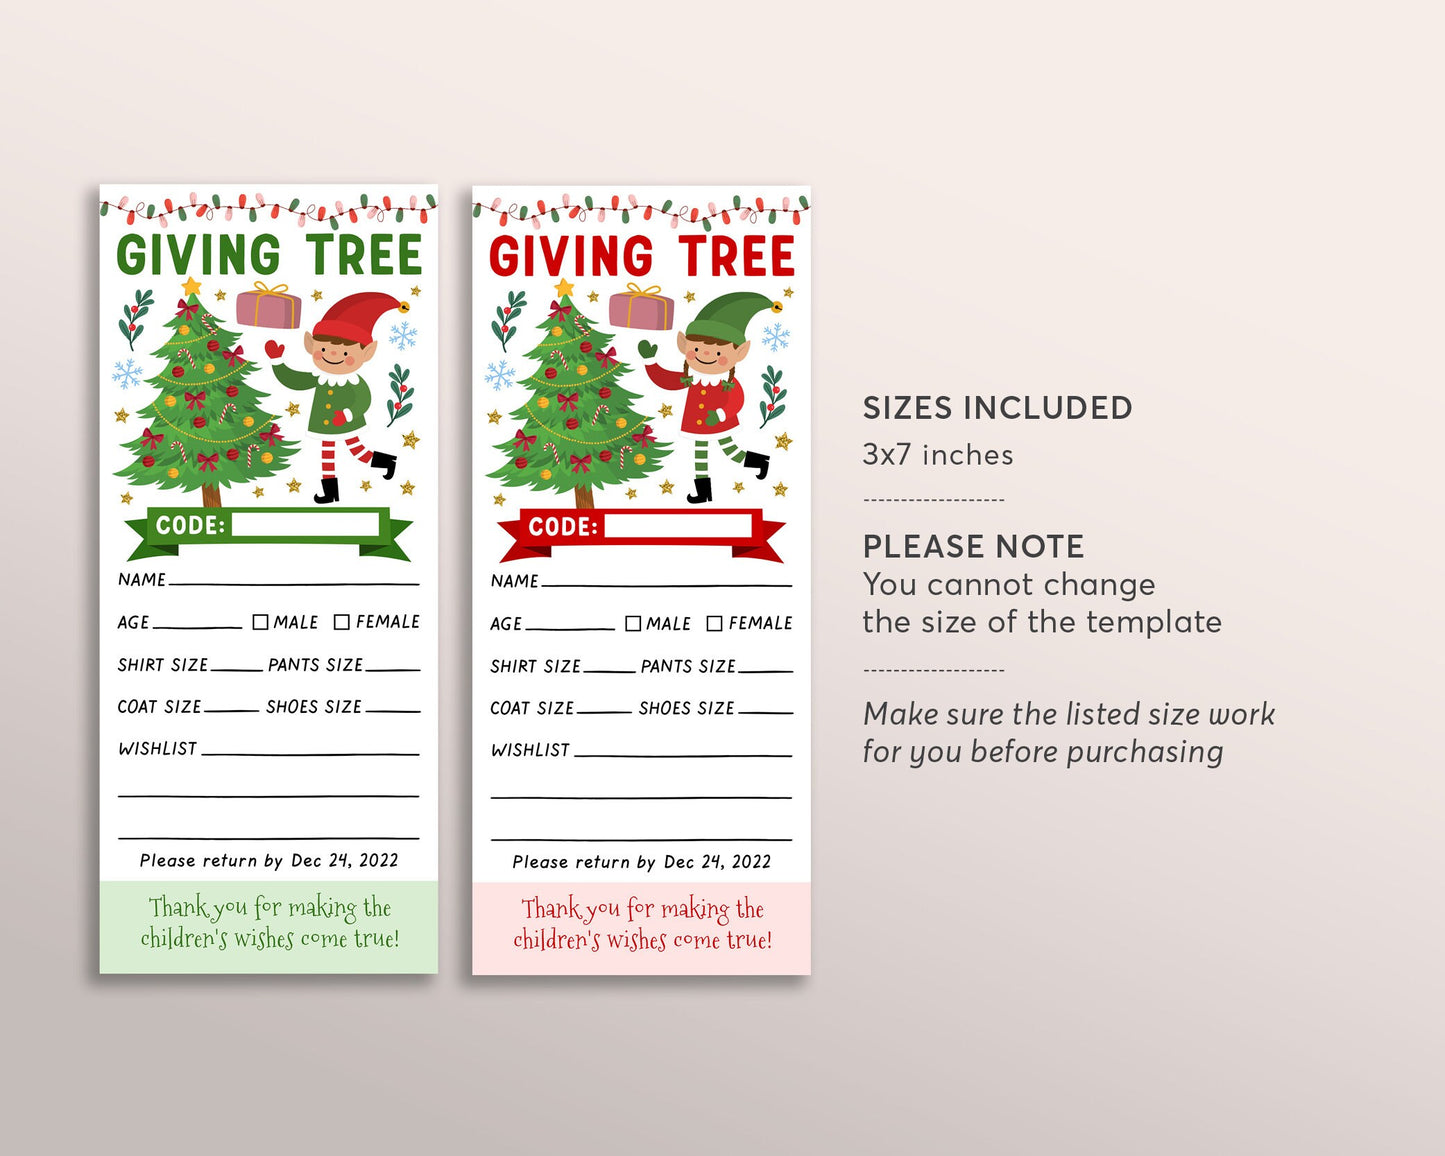 BOY and GIRL Elves Christmas Giving Tree Gift Tag Editable Template, Donation Slip With Elf Printable, Charity Community Event Church School